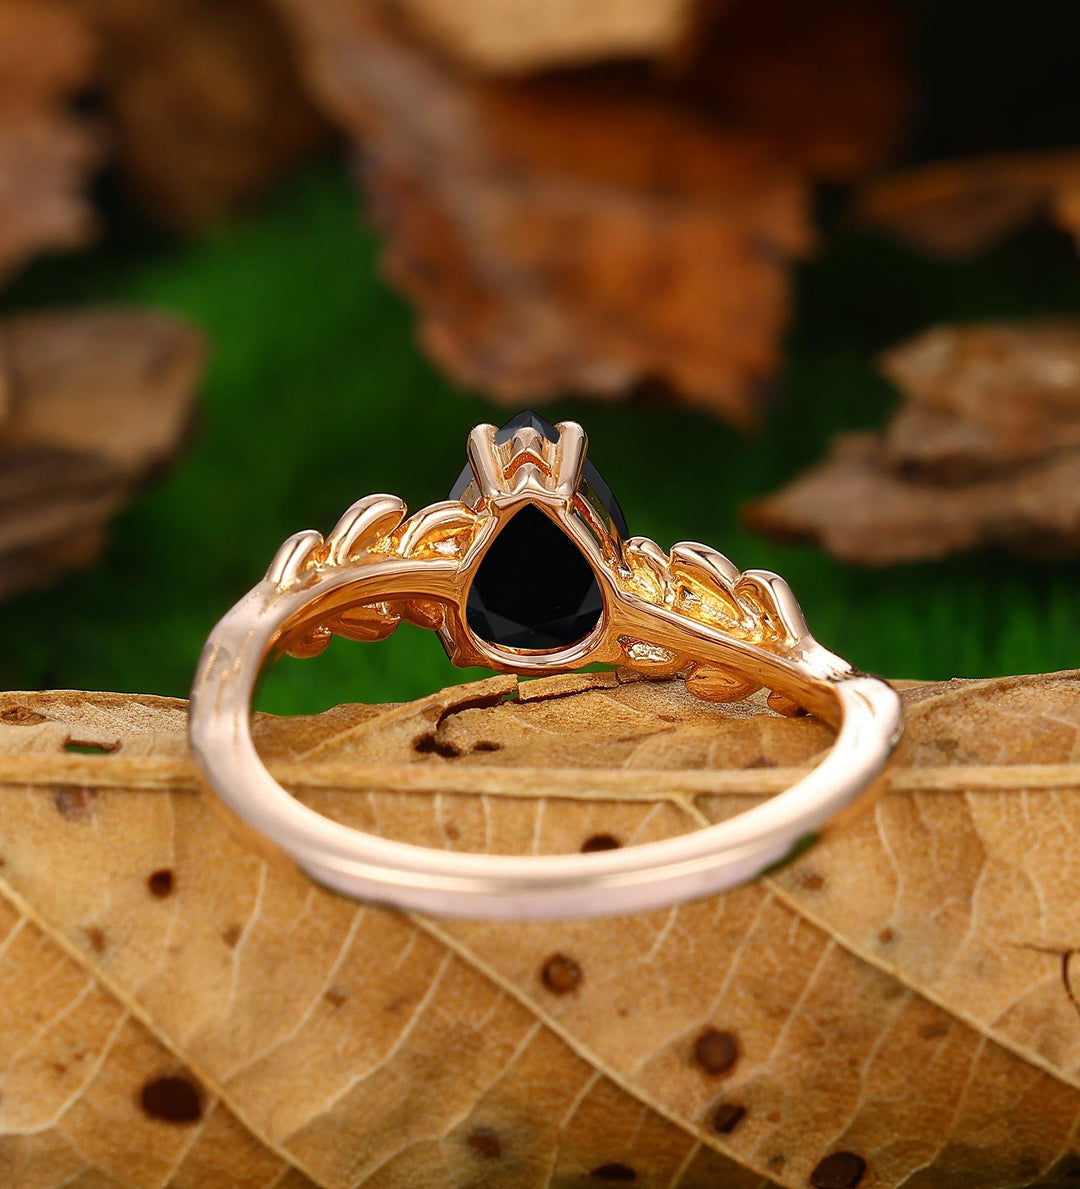 Vintage Nature Black Onyx Engagement Ring Emerald Cut 2.5 Carat Promise Ring Unique Stacking Ring - Esdomera